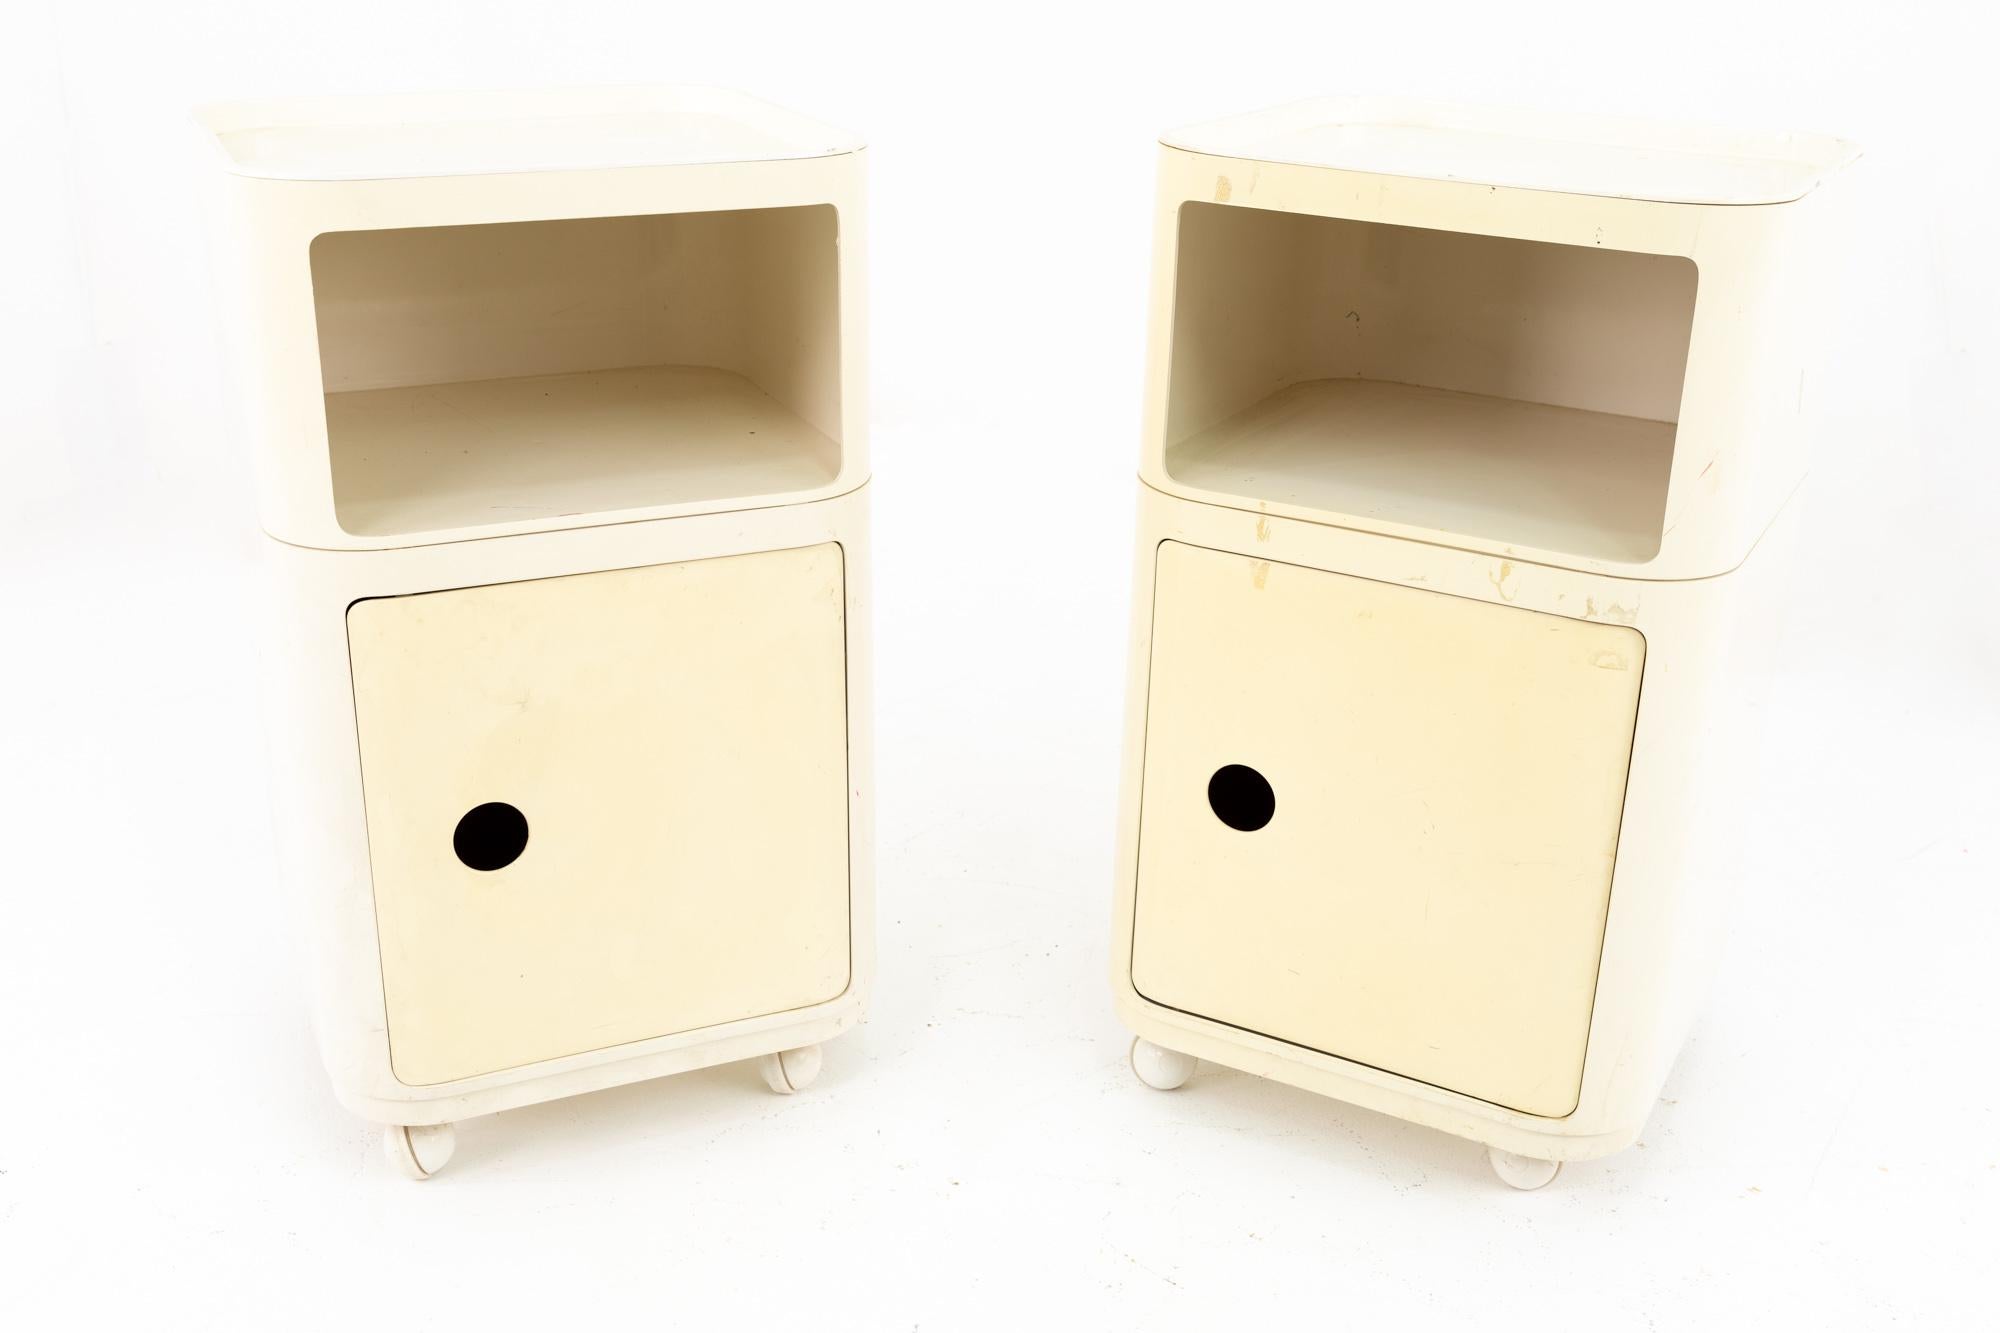 Anna Castelli Ferrieri for Kartell mid century componibili quadrati nightstands - Matching pair
These nightstands are 15 wide x 15 deep x 26 inches high

All pieces of furniture can be had in what we call restored vintage condition. That means